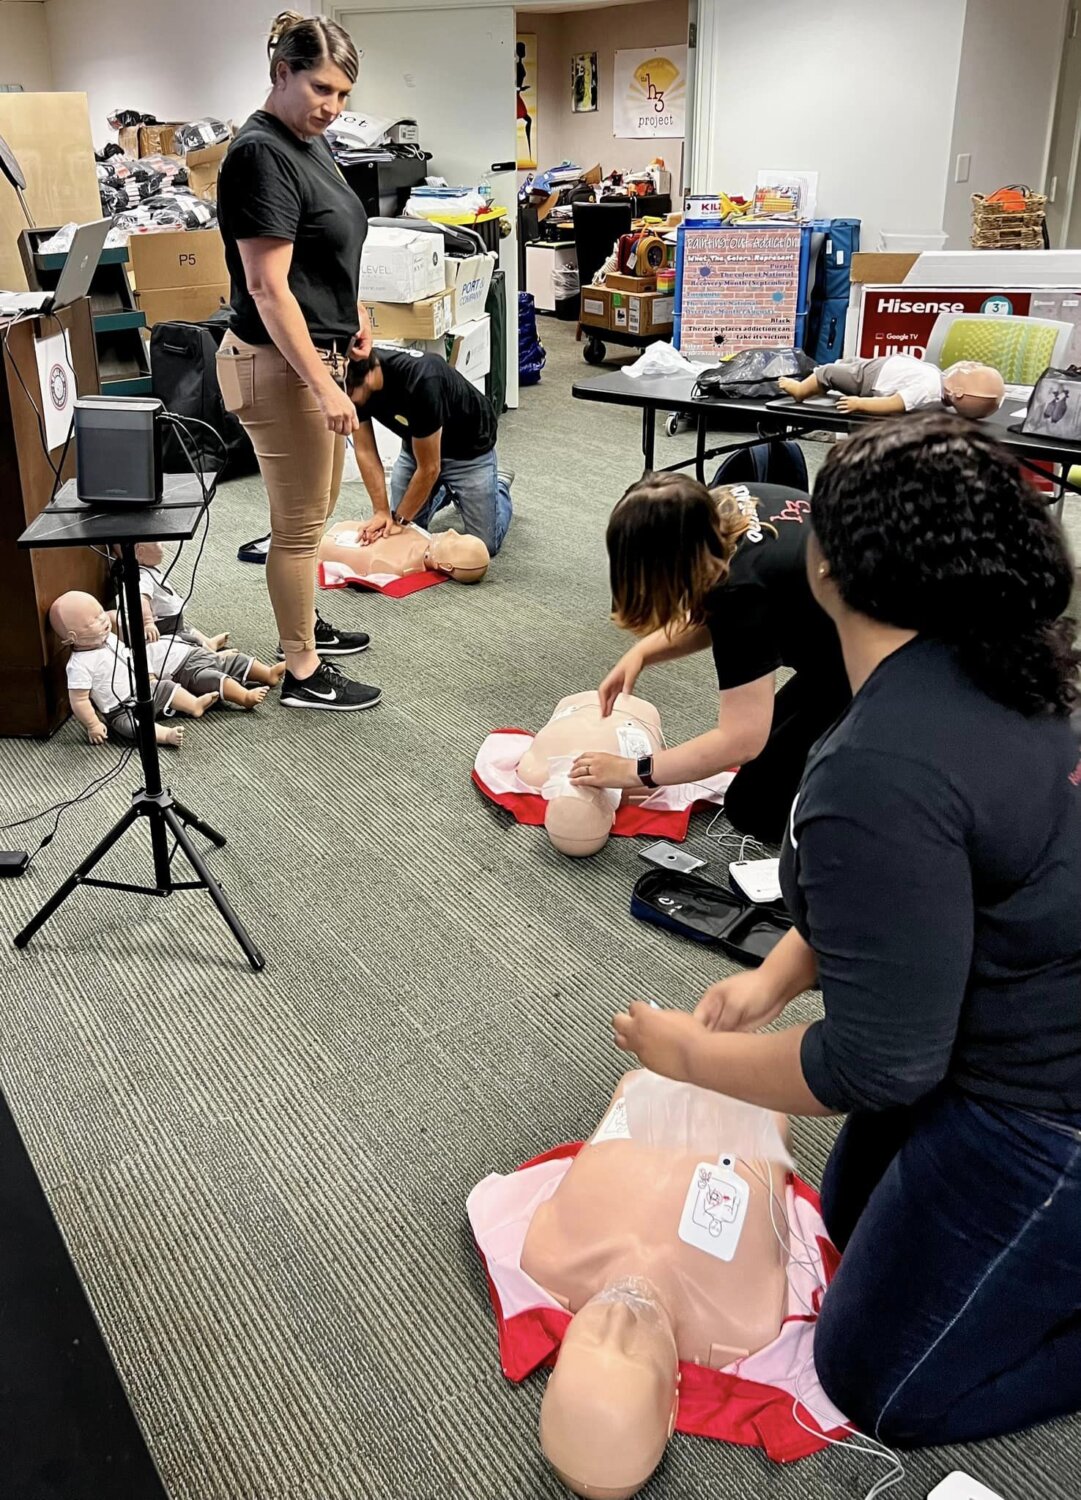 Angell teaches CPR/First AID/AED during a training session through The h3 Project.